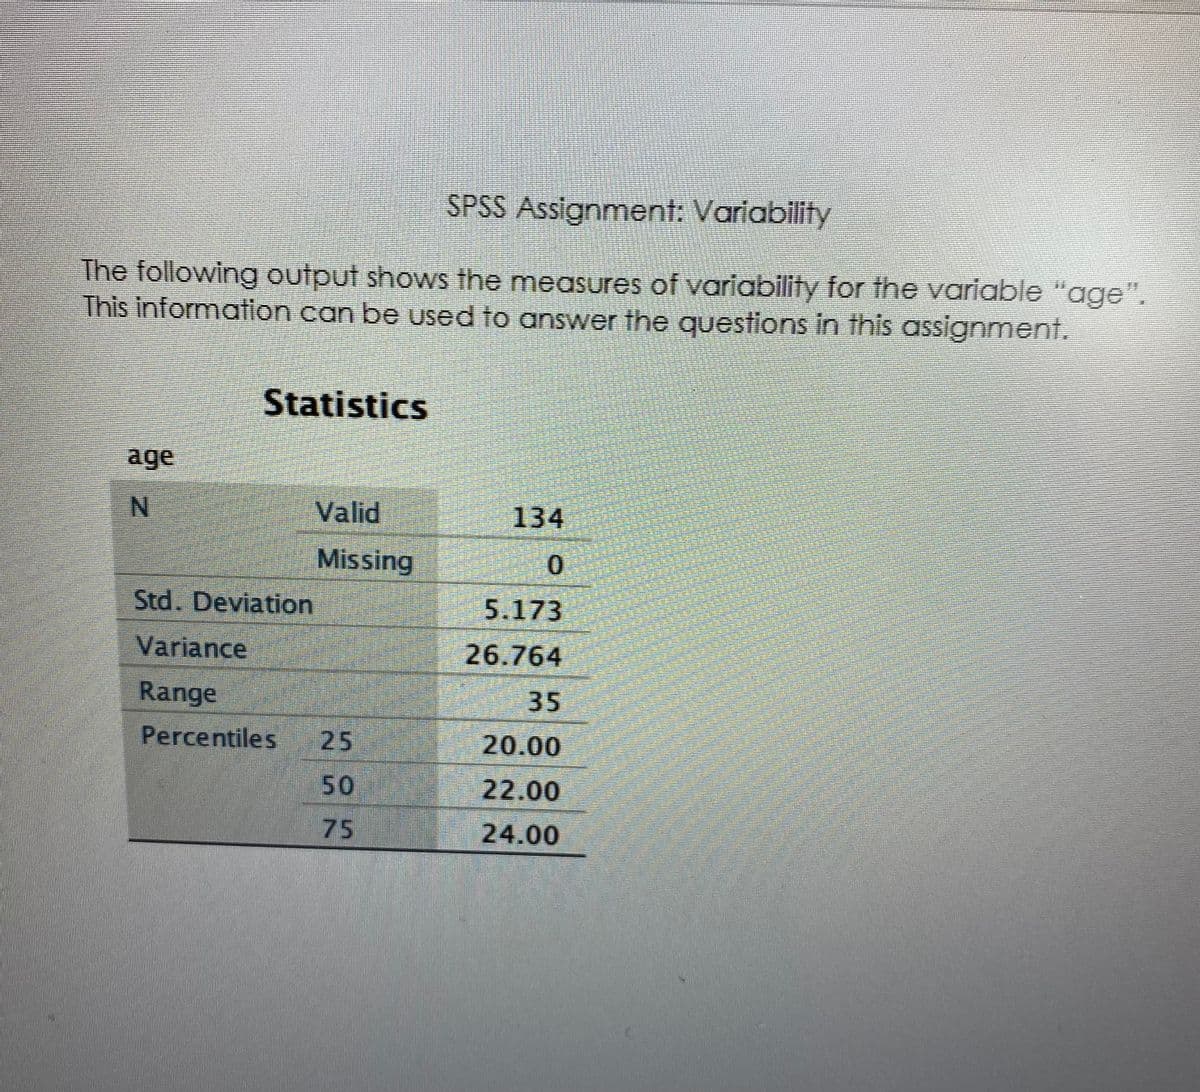 SPSS Assignment: Variability
The following output shows the measures of variability for the variable "age".
This information can be used to answer the questions in this assignment.
Statistics
age
Valid
134
Missing
Std. Deviation
5.173
Variance
26.764
Range
35
Percentiles
25
20.00
50
22.00
75
24.00
